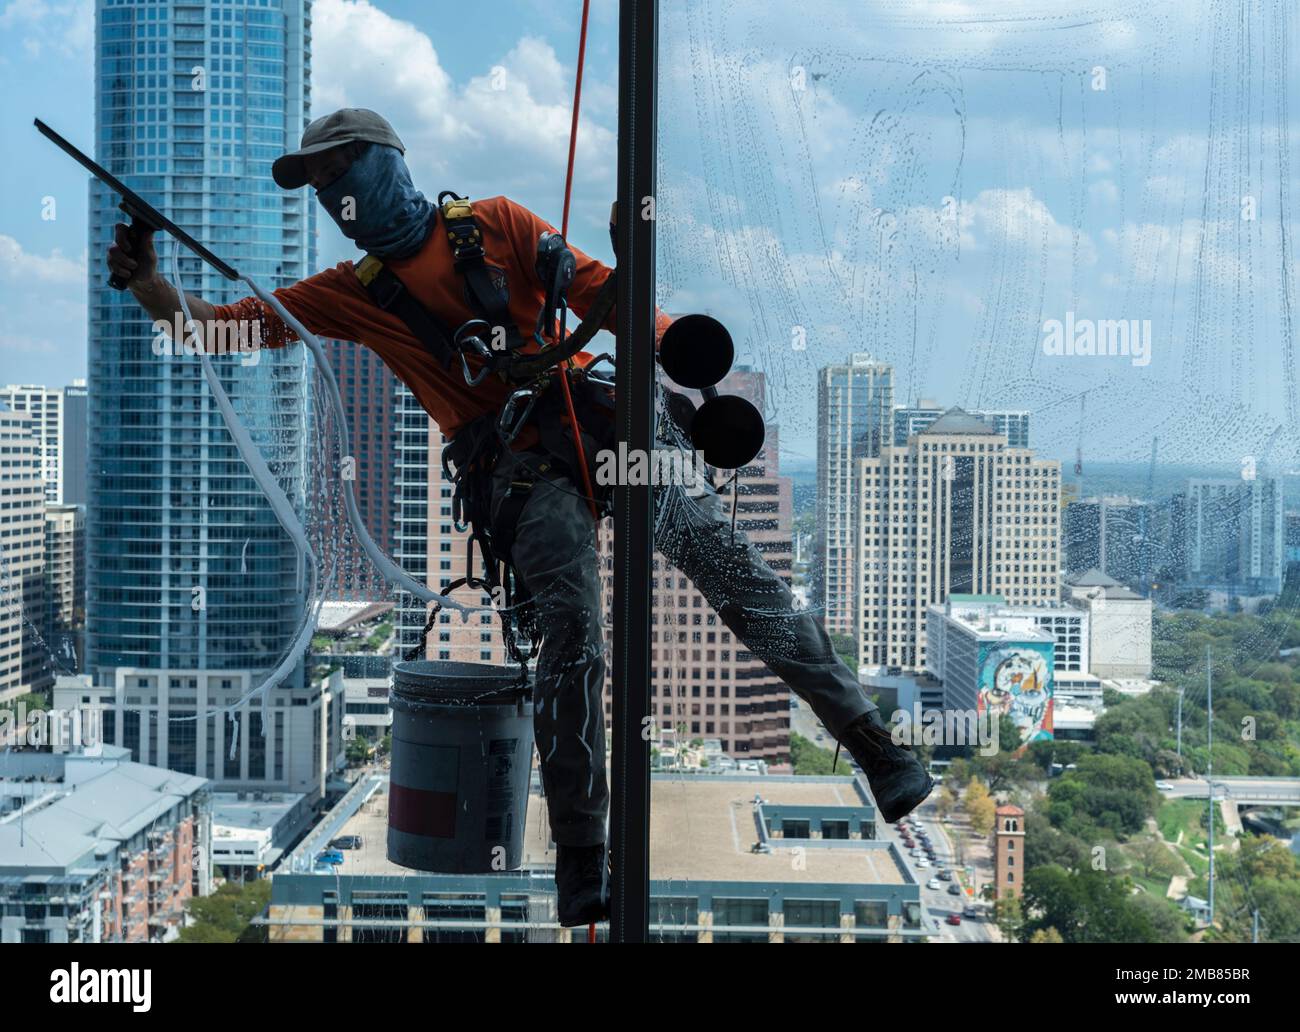 Window washer high on apartment building with Austin CIty Skyline. Stock Photo